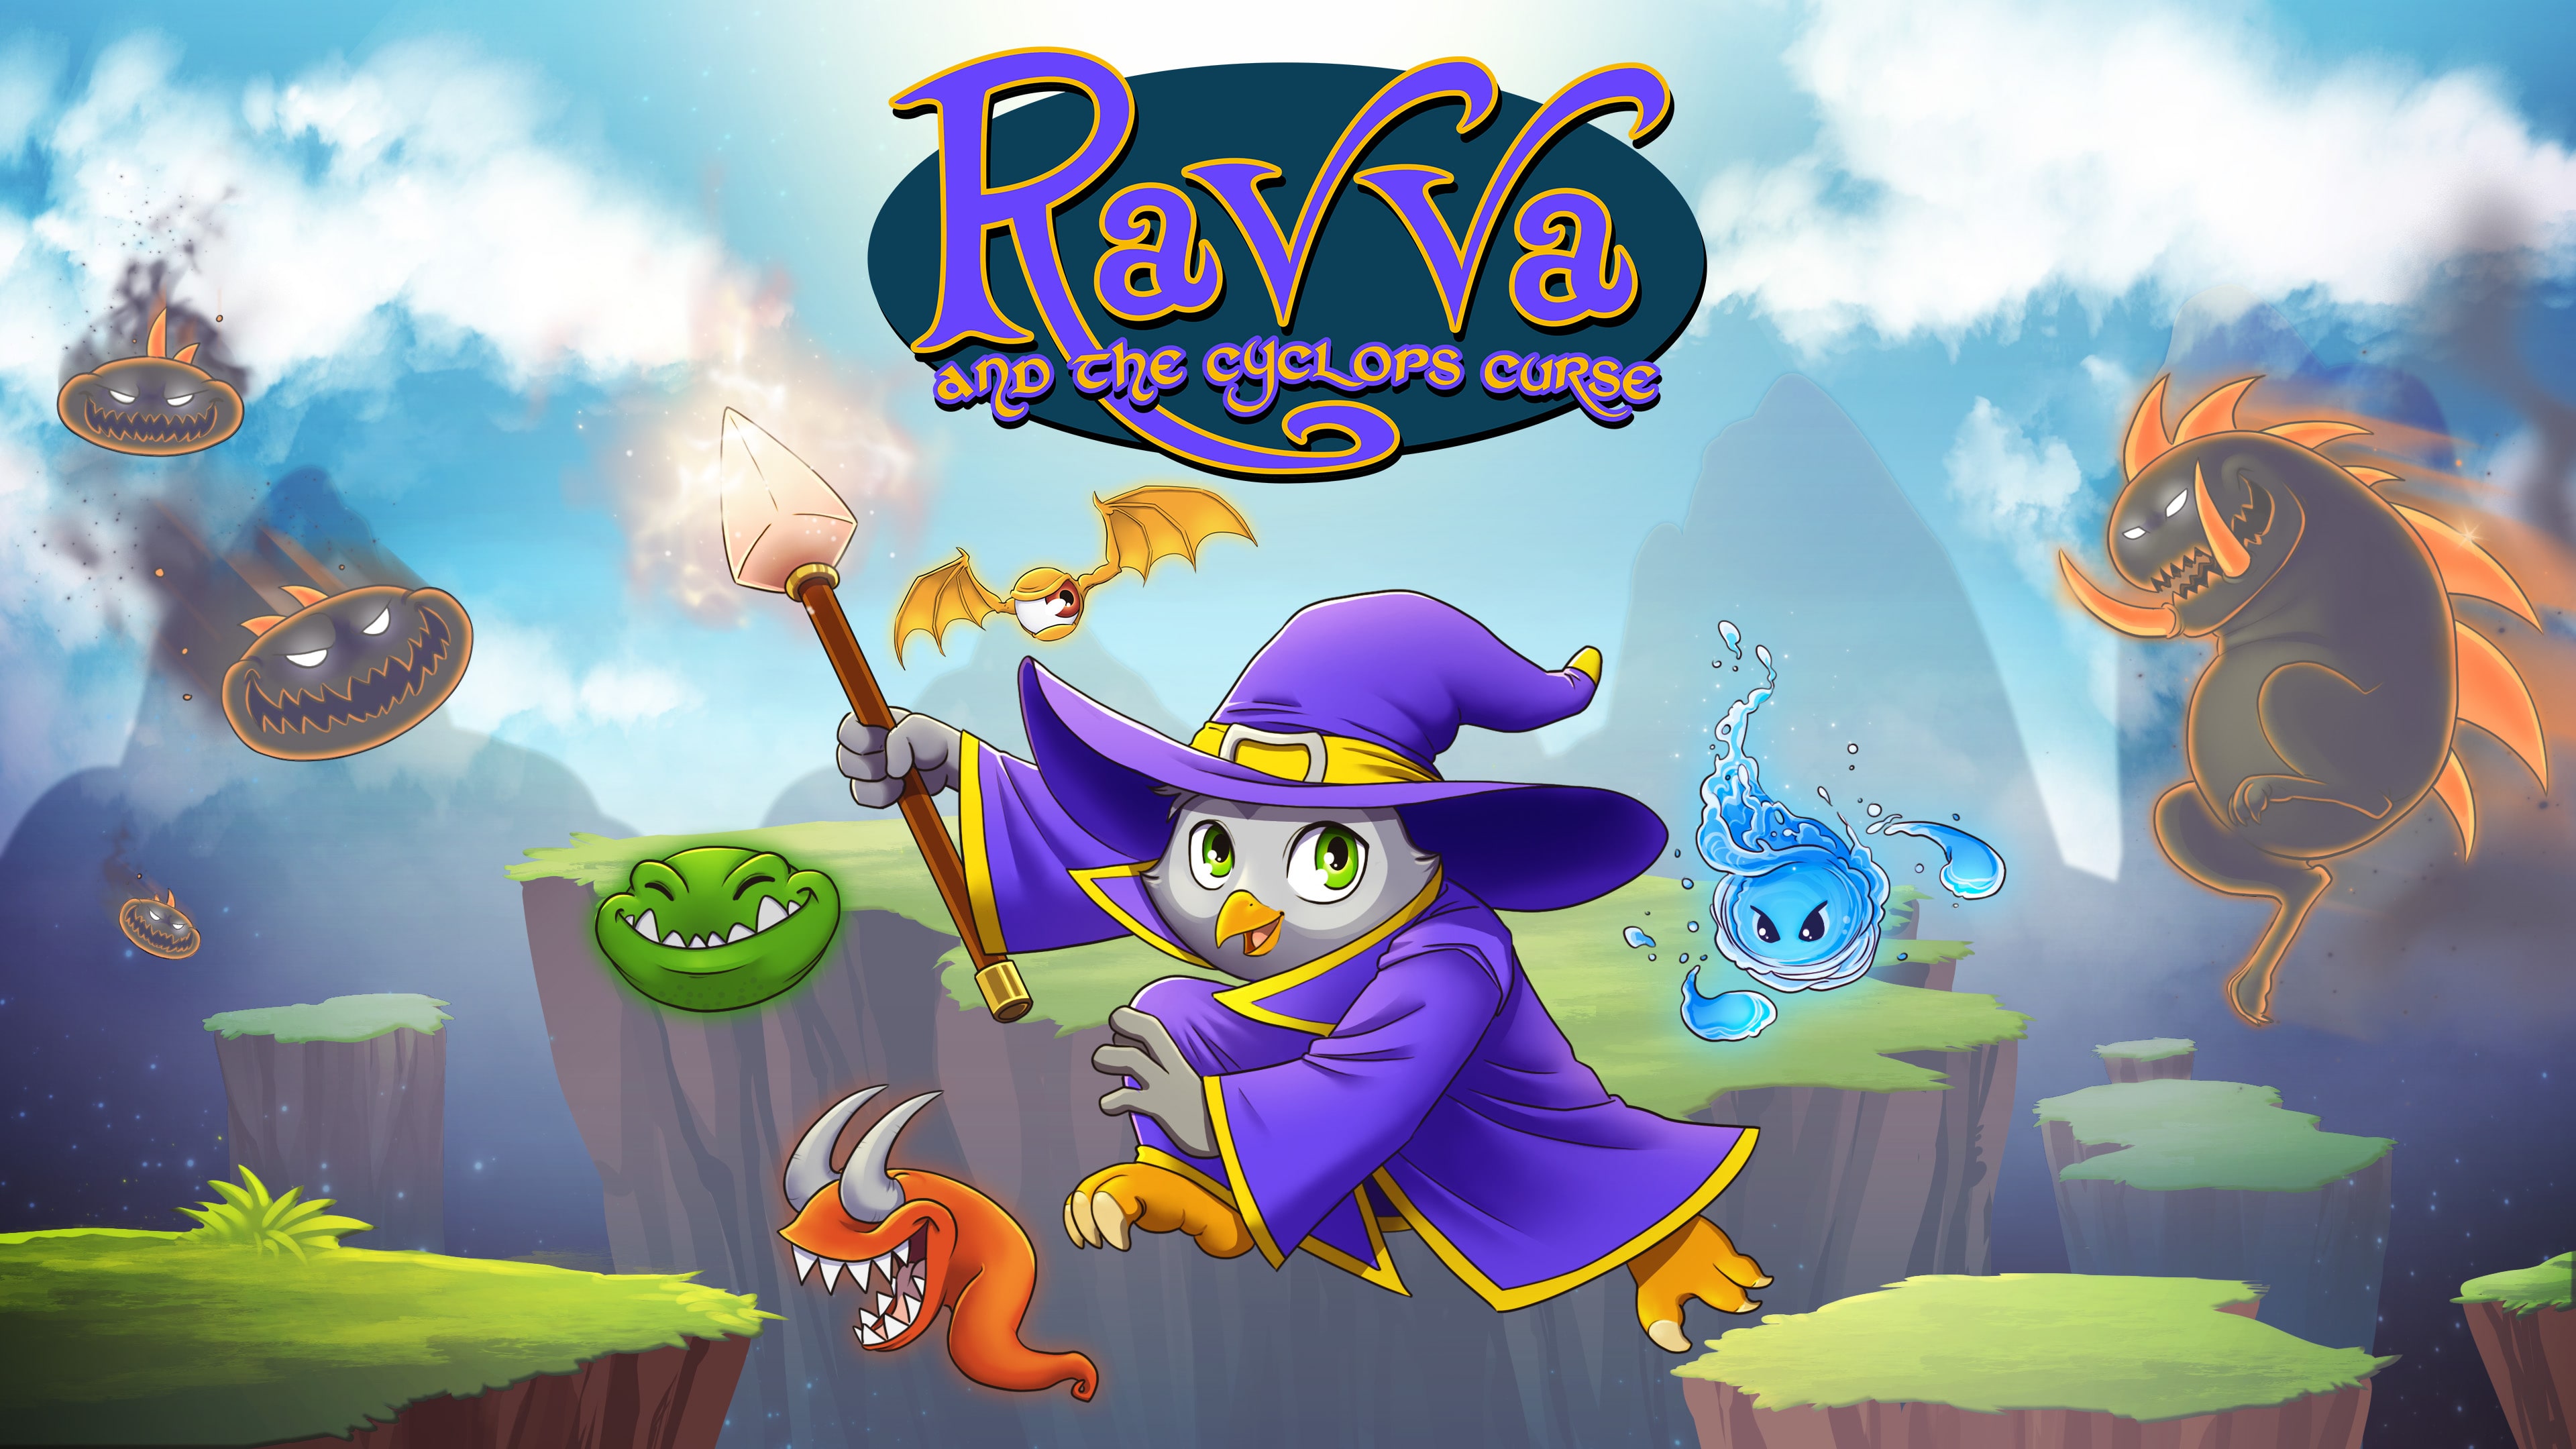 Ravva and the Cyclops Curse (Simplified Chinese, English, Korean, Japanese)